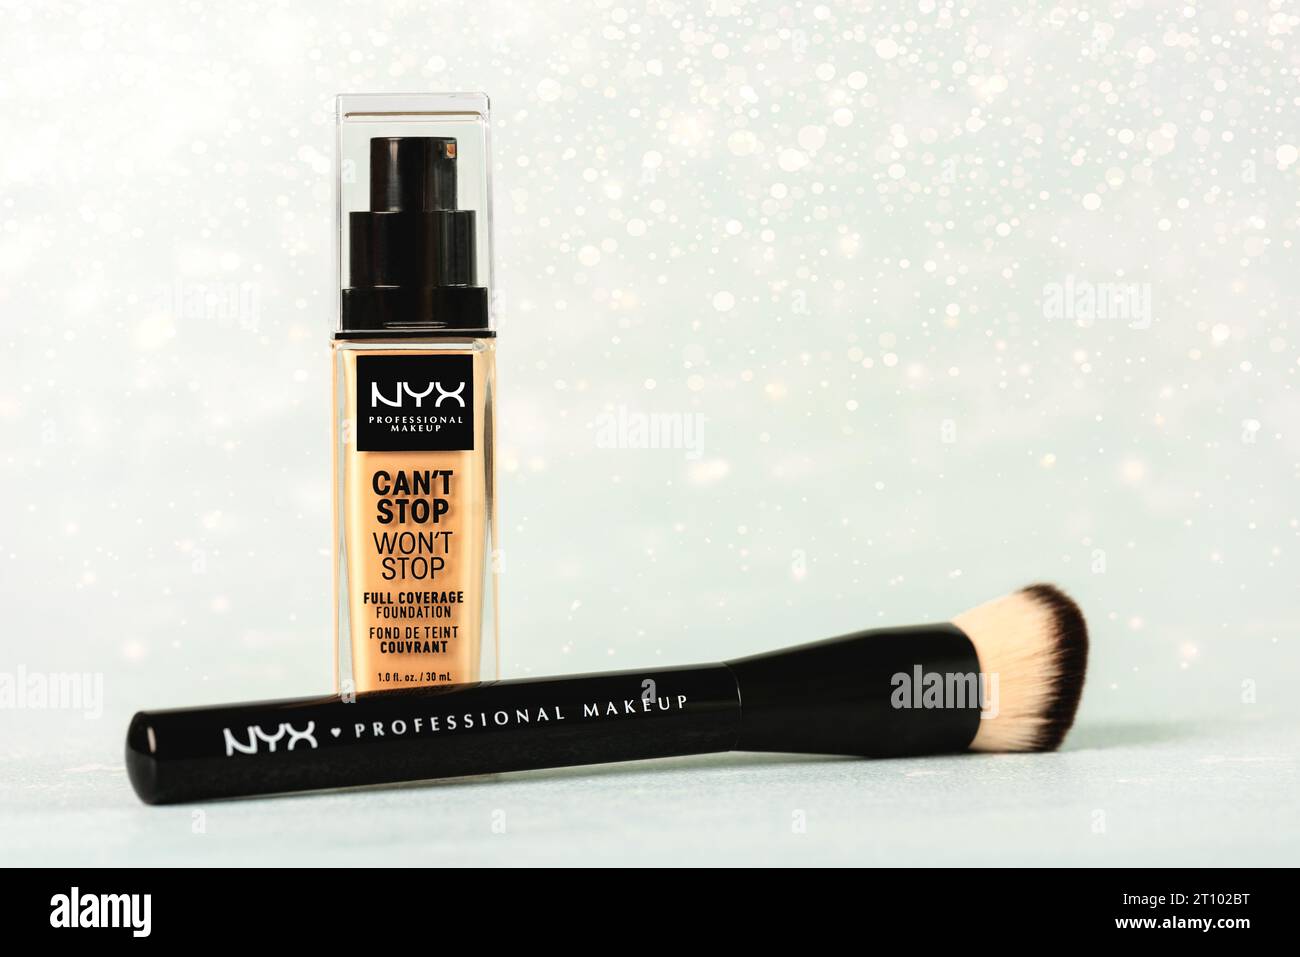 Makeup foundation bottle Can'stop won'stop Full coverage foundation NYX professional makeup and makeup brush over light background. NYX professional m Stock Photo